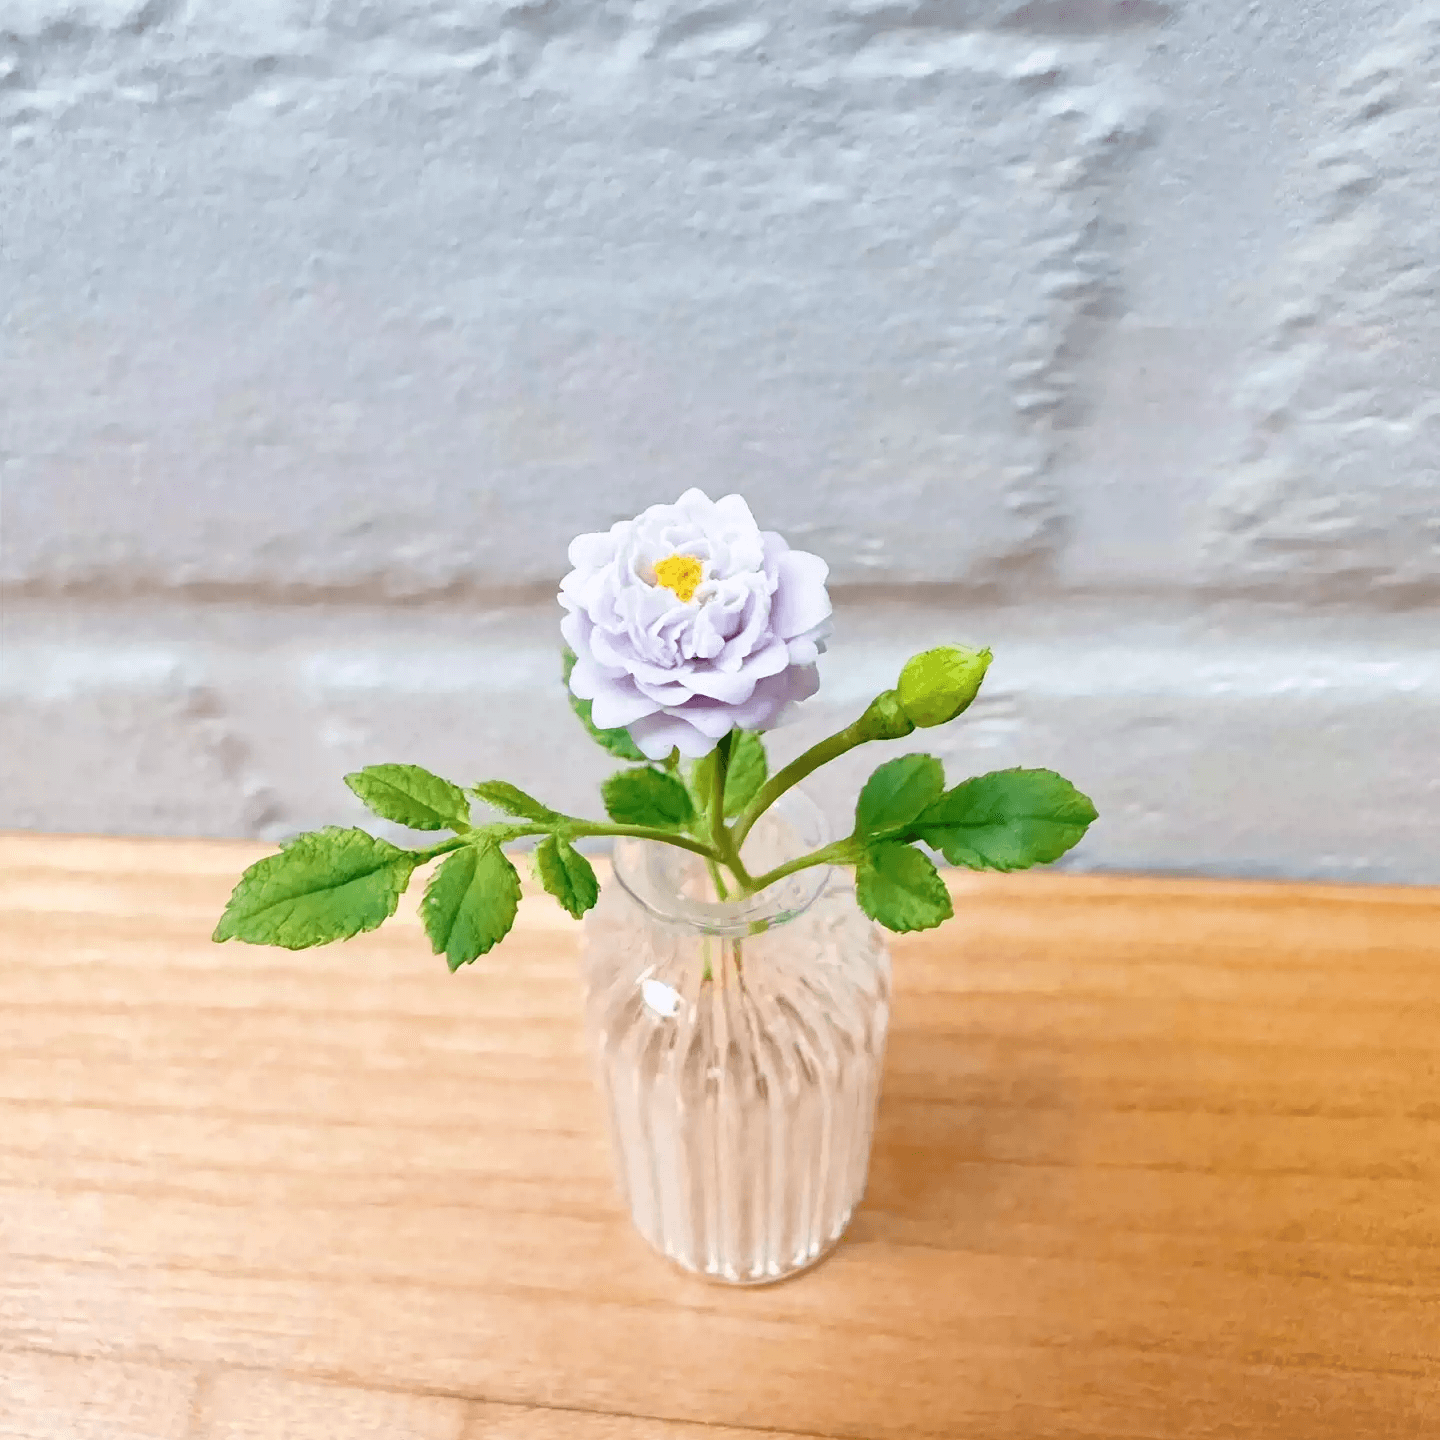 The flowers of Rainy Blue Climbing Rose are lavender, it is a very rare cool-toned climbing rose variety. Miniature for dolls, dollhouses, roomboxes. Suitable for Blythe, Barbie, Paola,and other dolls with a height of 25-40cm (10-15.8 inches). Scale: 1:6; 1:12 Material: Handmade from Clay